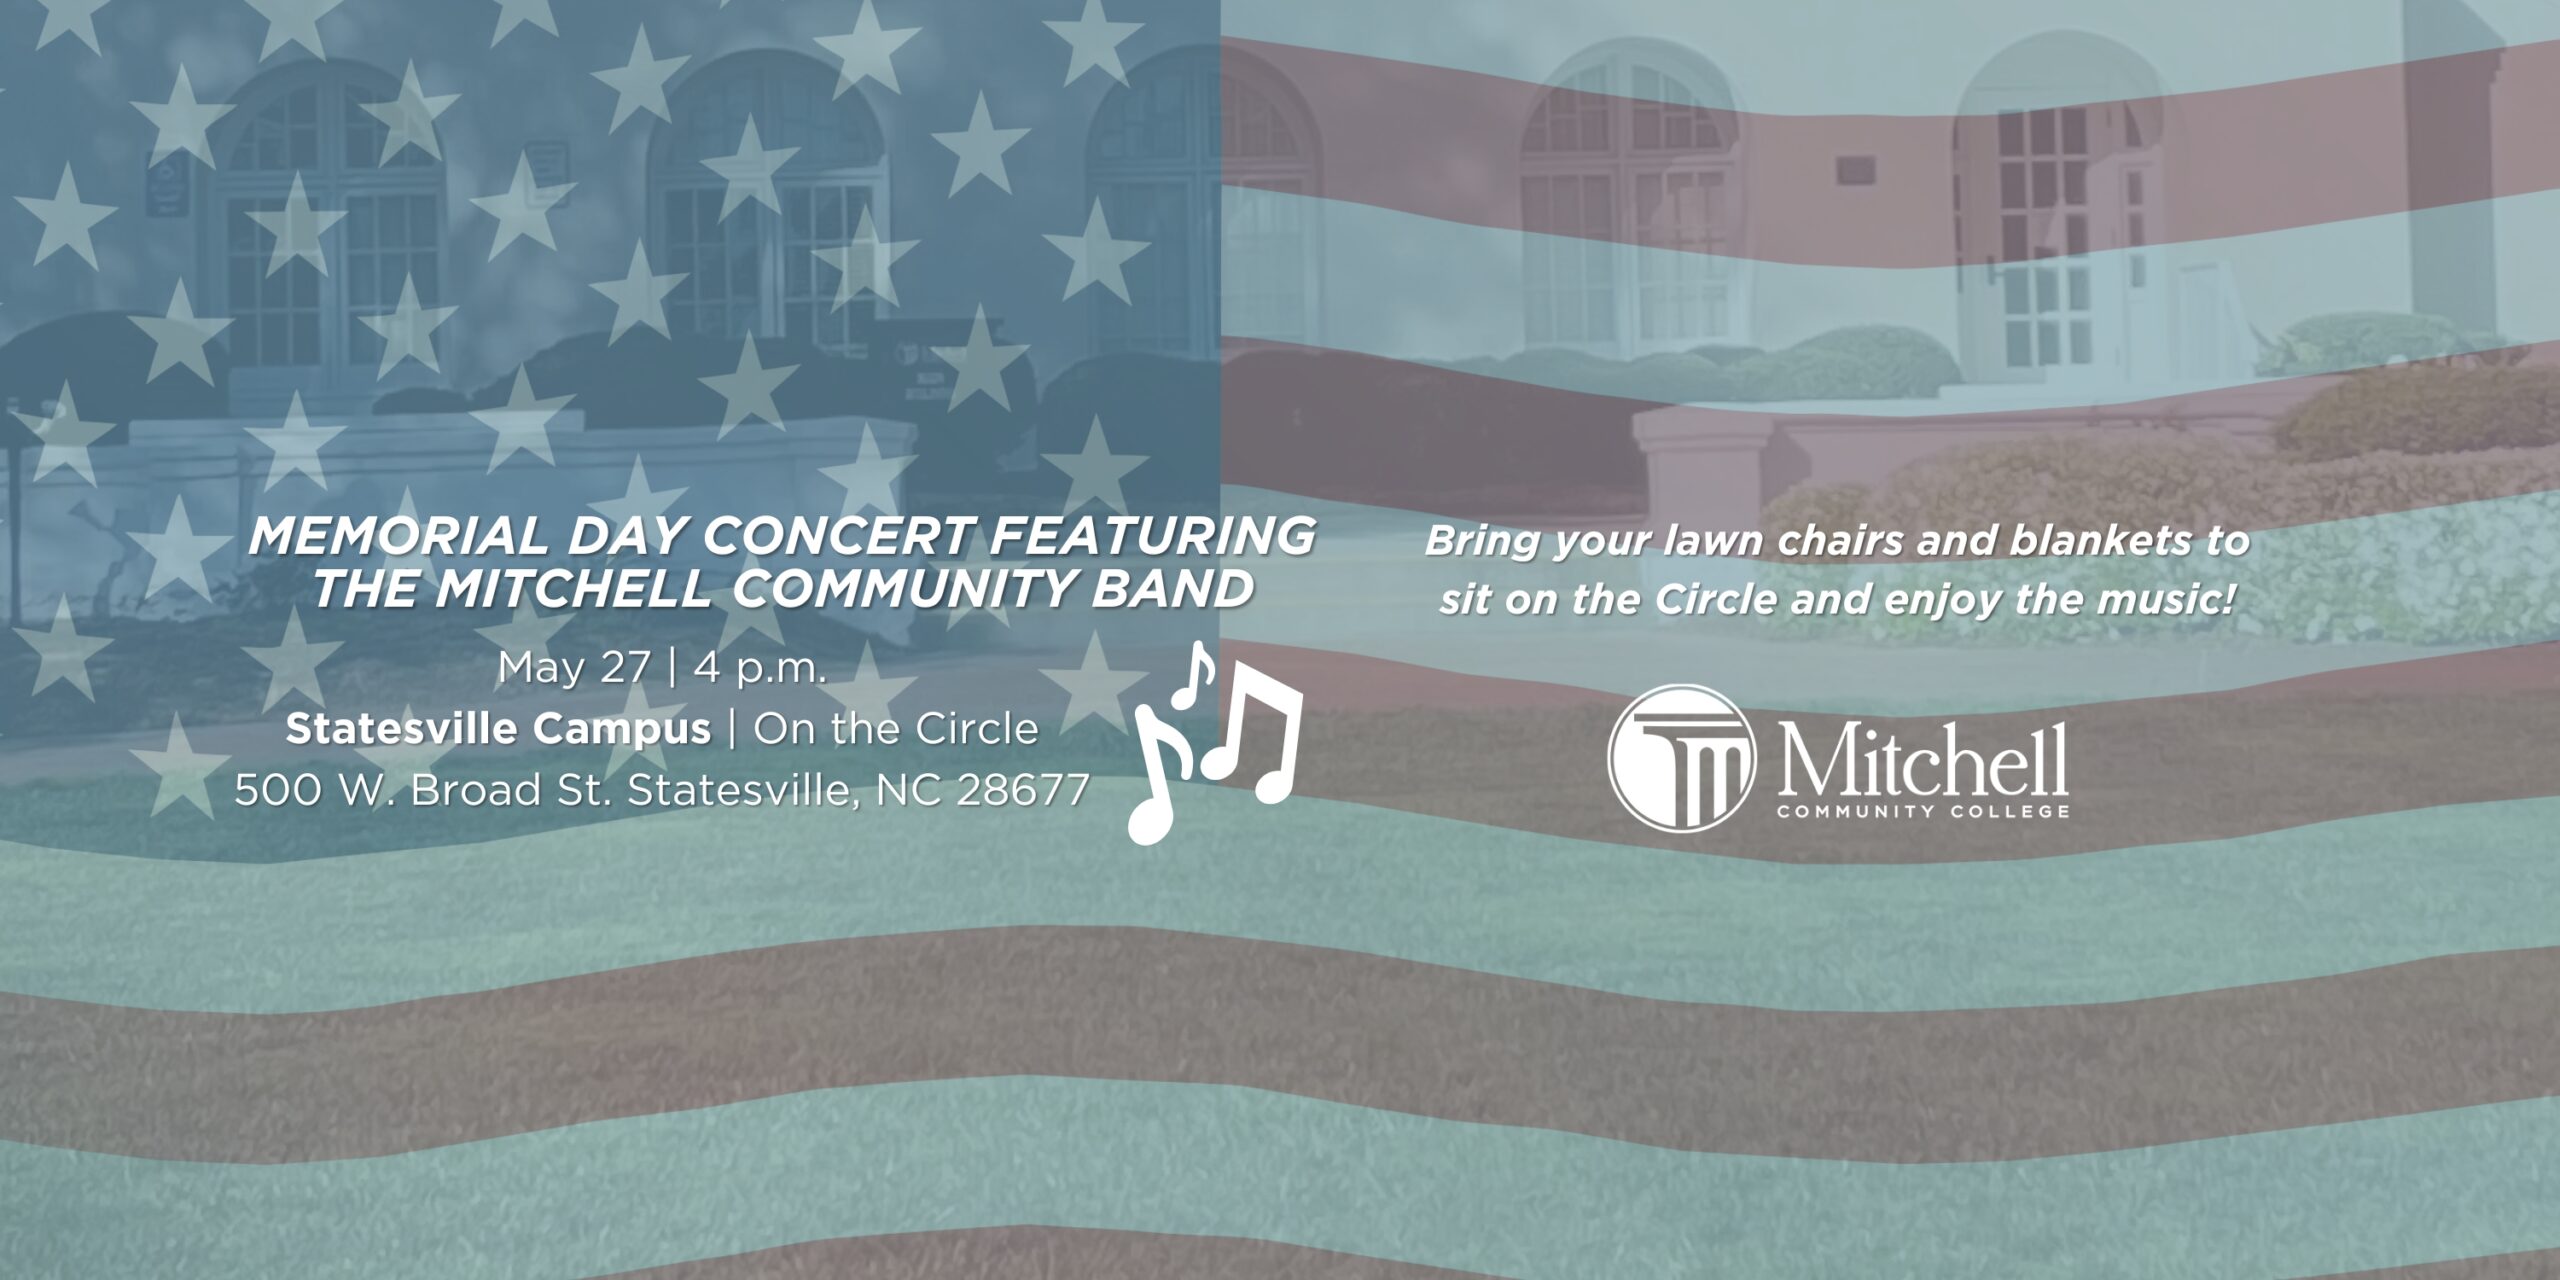 Banner that reads "Memorial Day Concert Featuring the Mitchell Community Band | May 27 - 4 p.m. | Statesville Campus | On the Circle | 500 W. Broad St. Statesville, NC 28677 | Bring your lawn chairs and blankets to sit on the Circle and enjoy the music!".